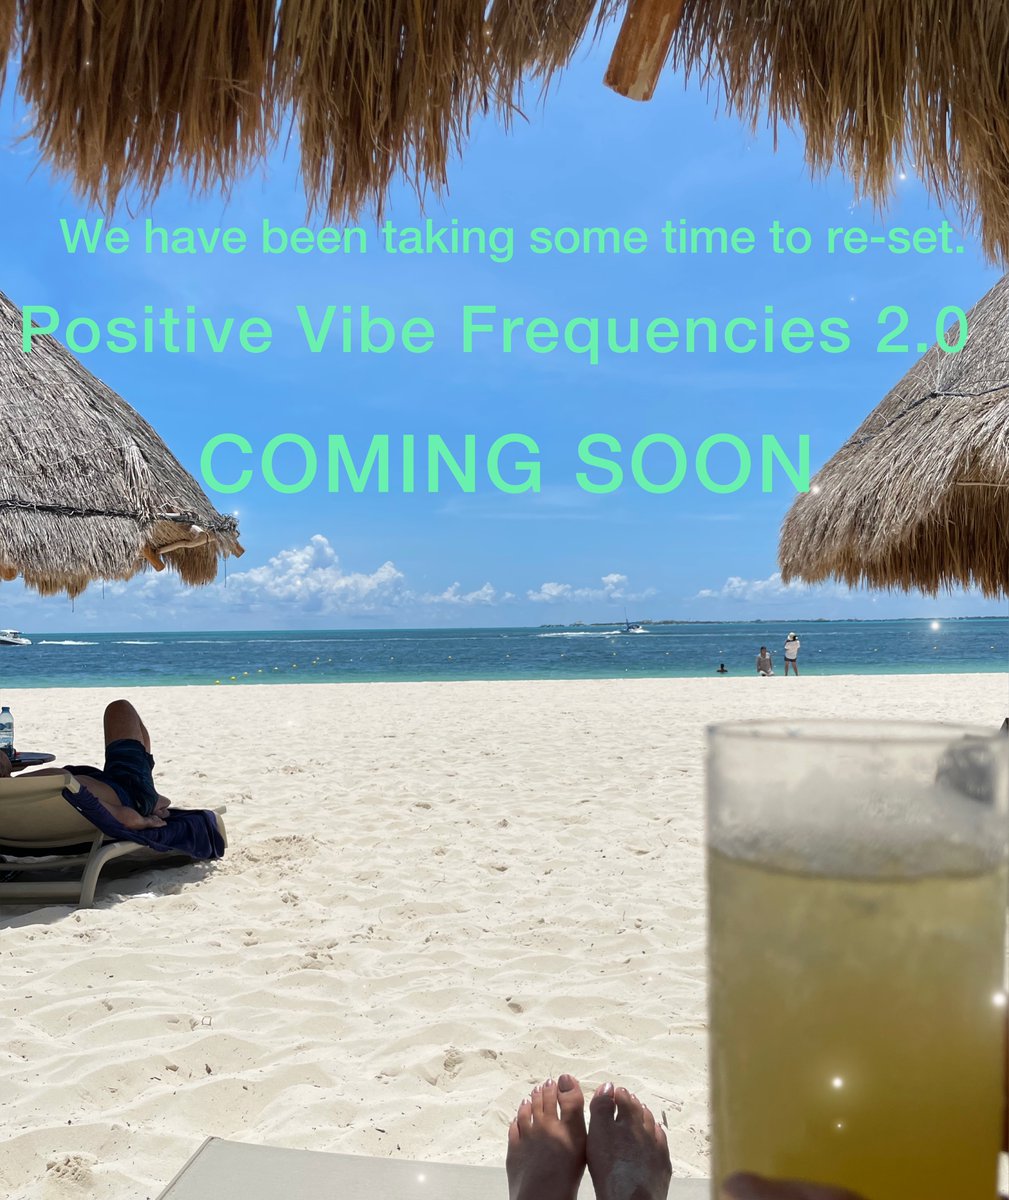 We have shifted our priorities and are re-vamping our store to be more aligned with our values. PVF2.0 COMING SOON!! #consciousconsumers #SustainableLiving  #LoveEarth